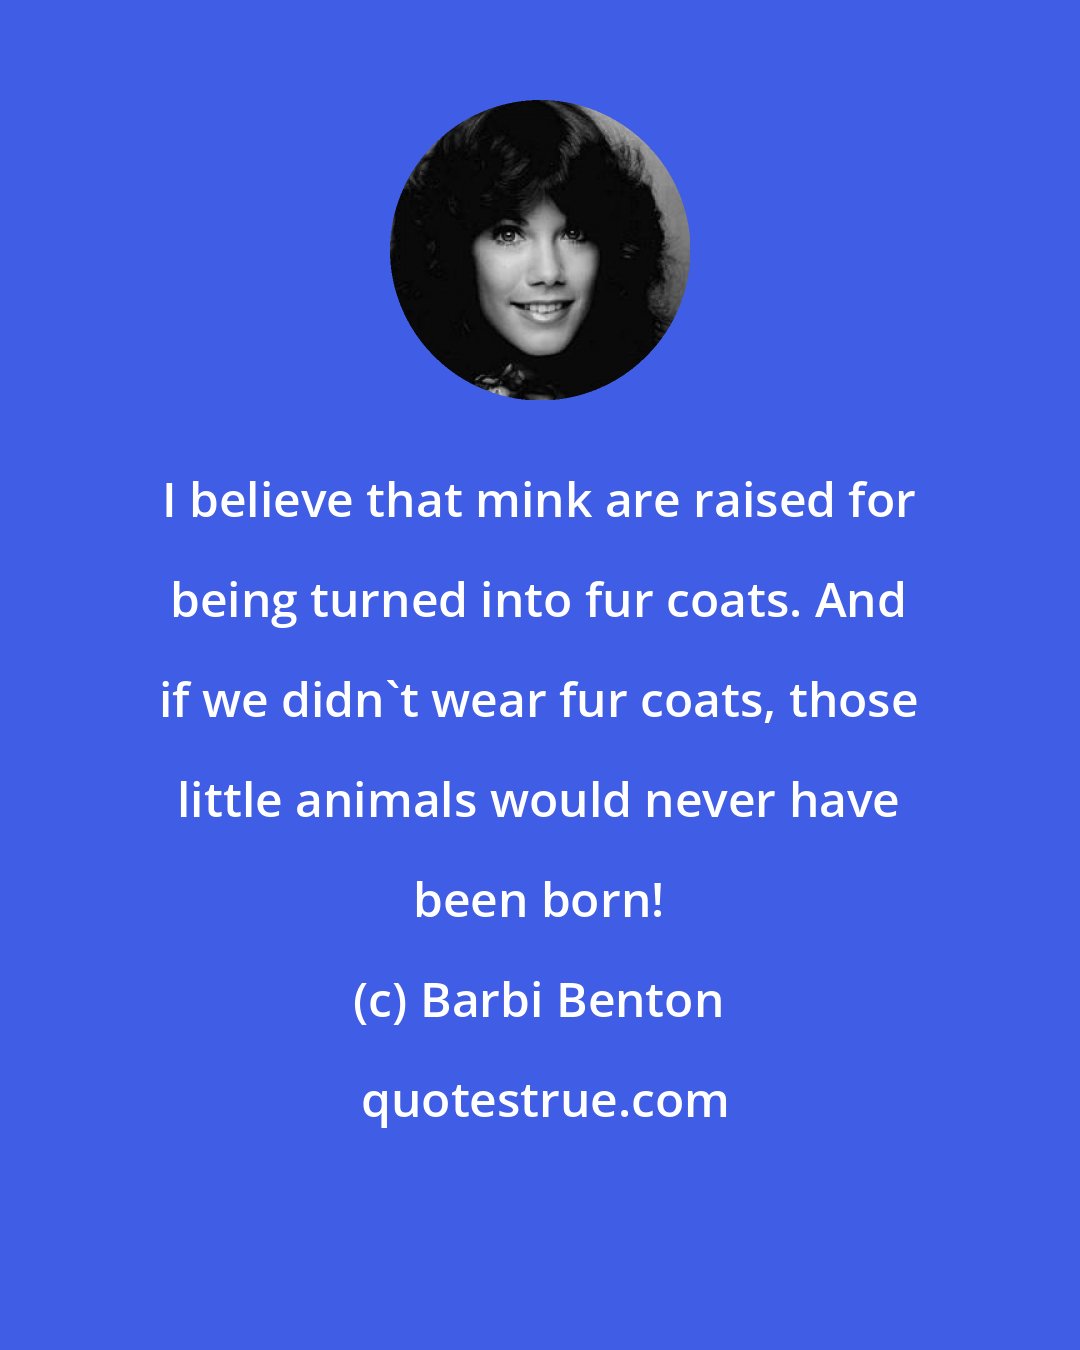 Barbi Benton: I believe that mink are raised for being turned into fur coats. And if we didn't wear fur coats, those little animals would never have been born!